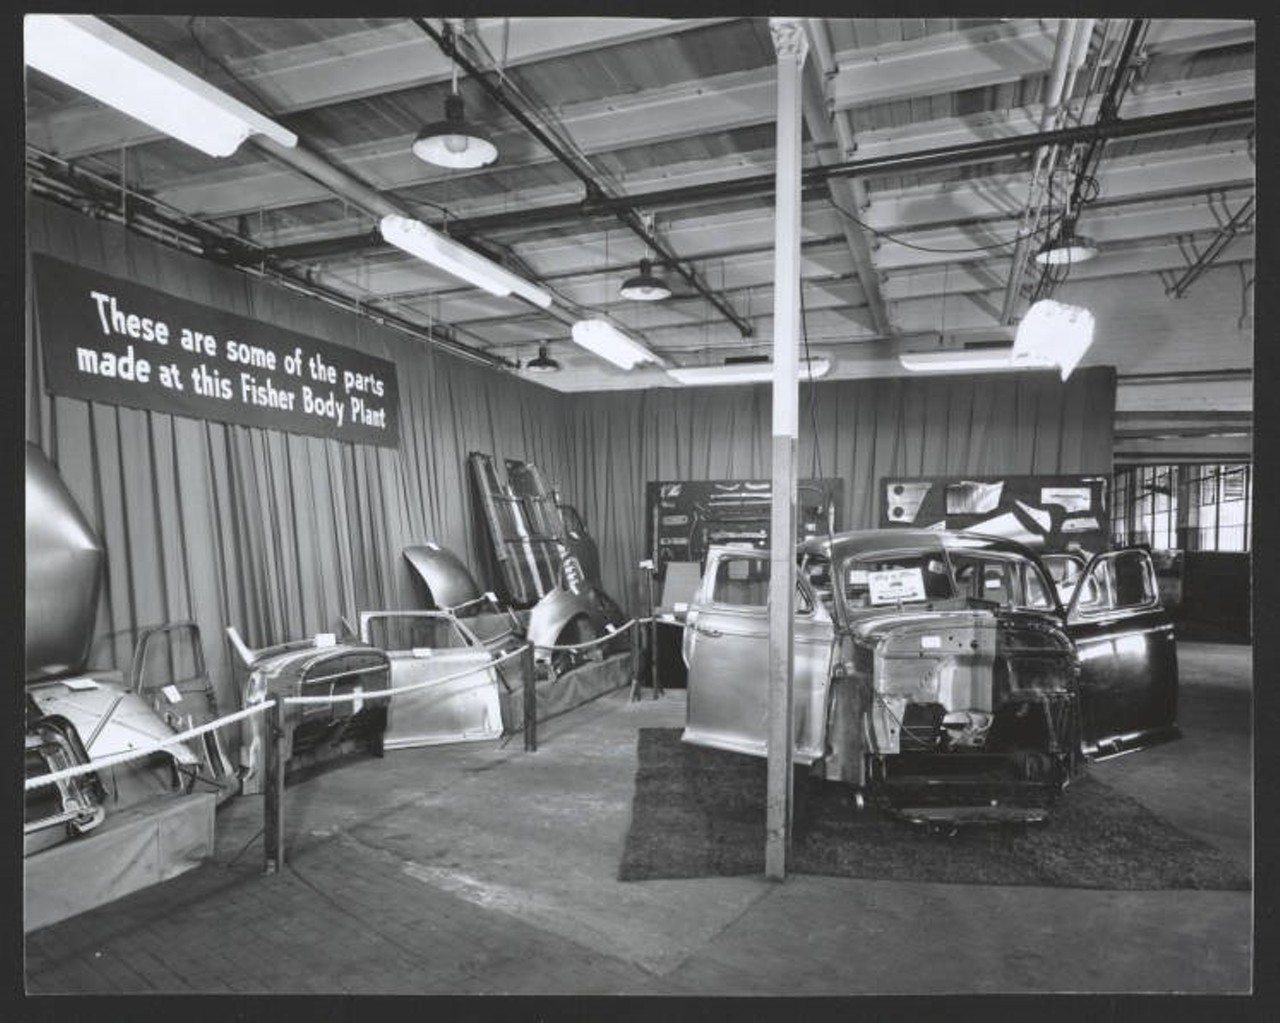 Exhibit area, sign reads These are some of the parts made at this Fisher Body Plant. c. 1946